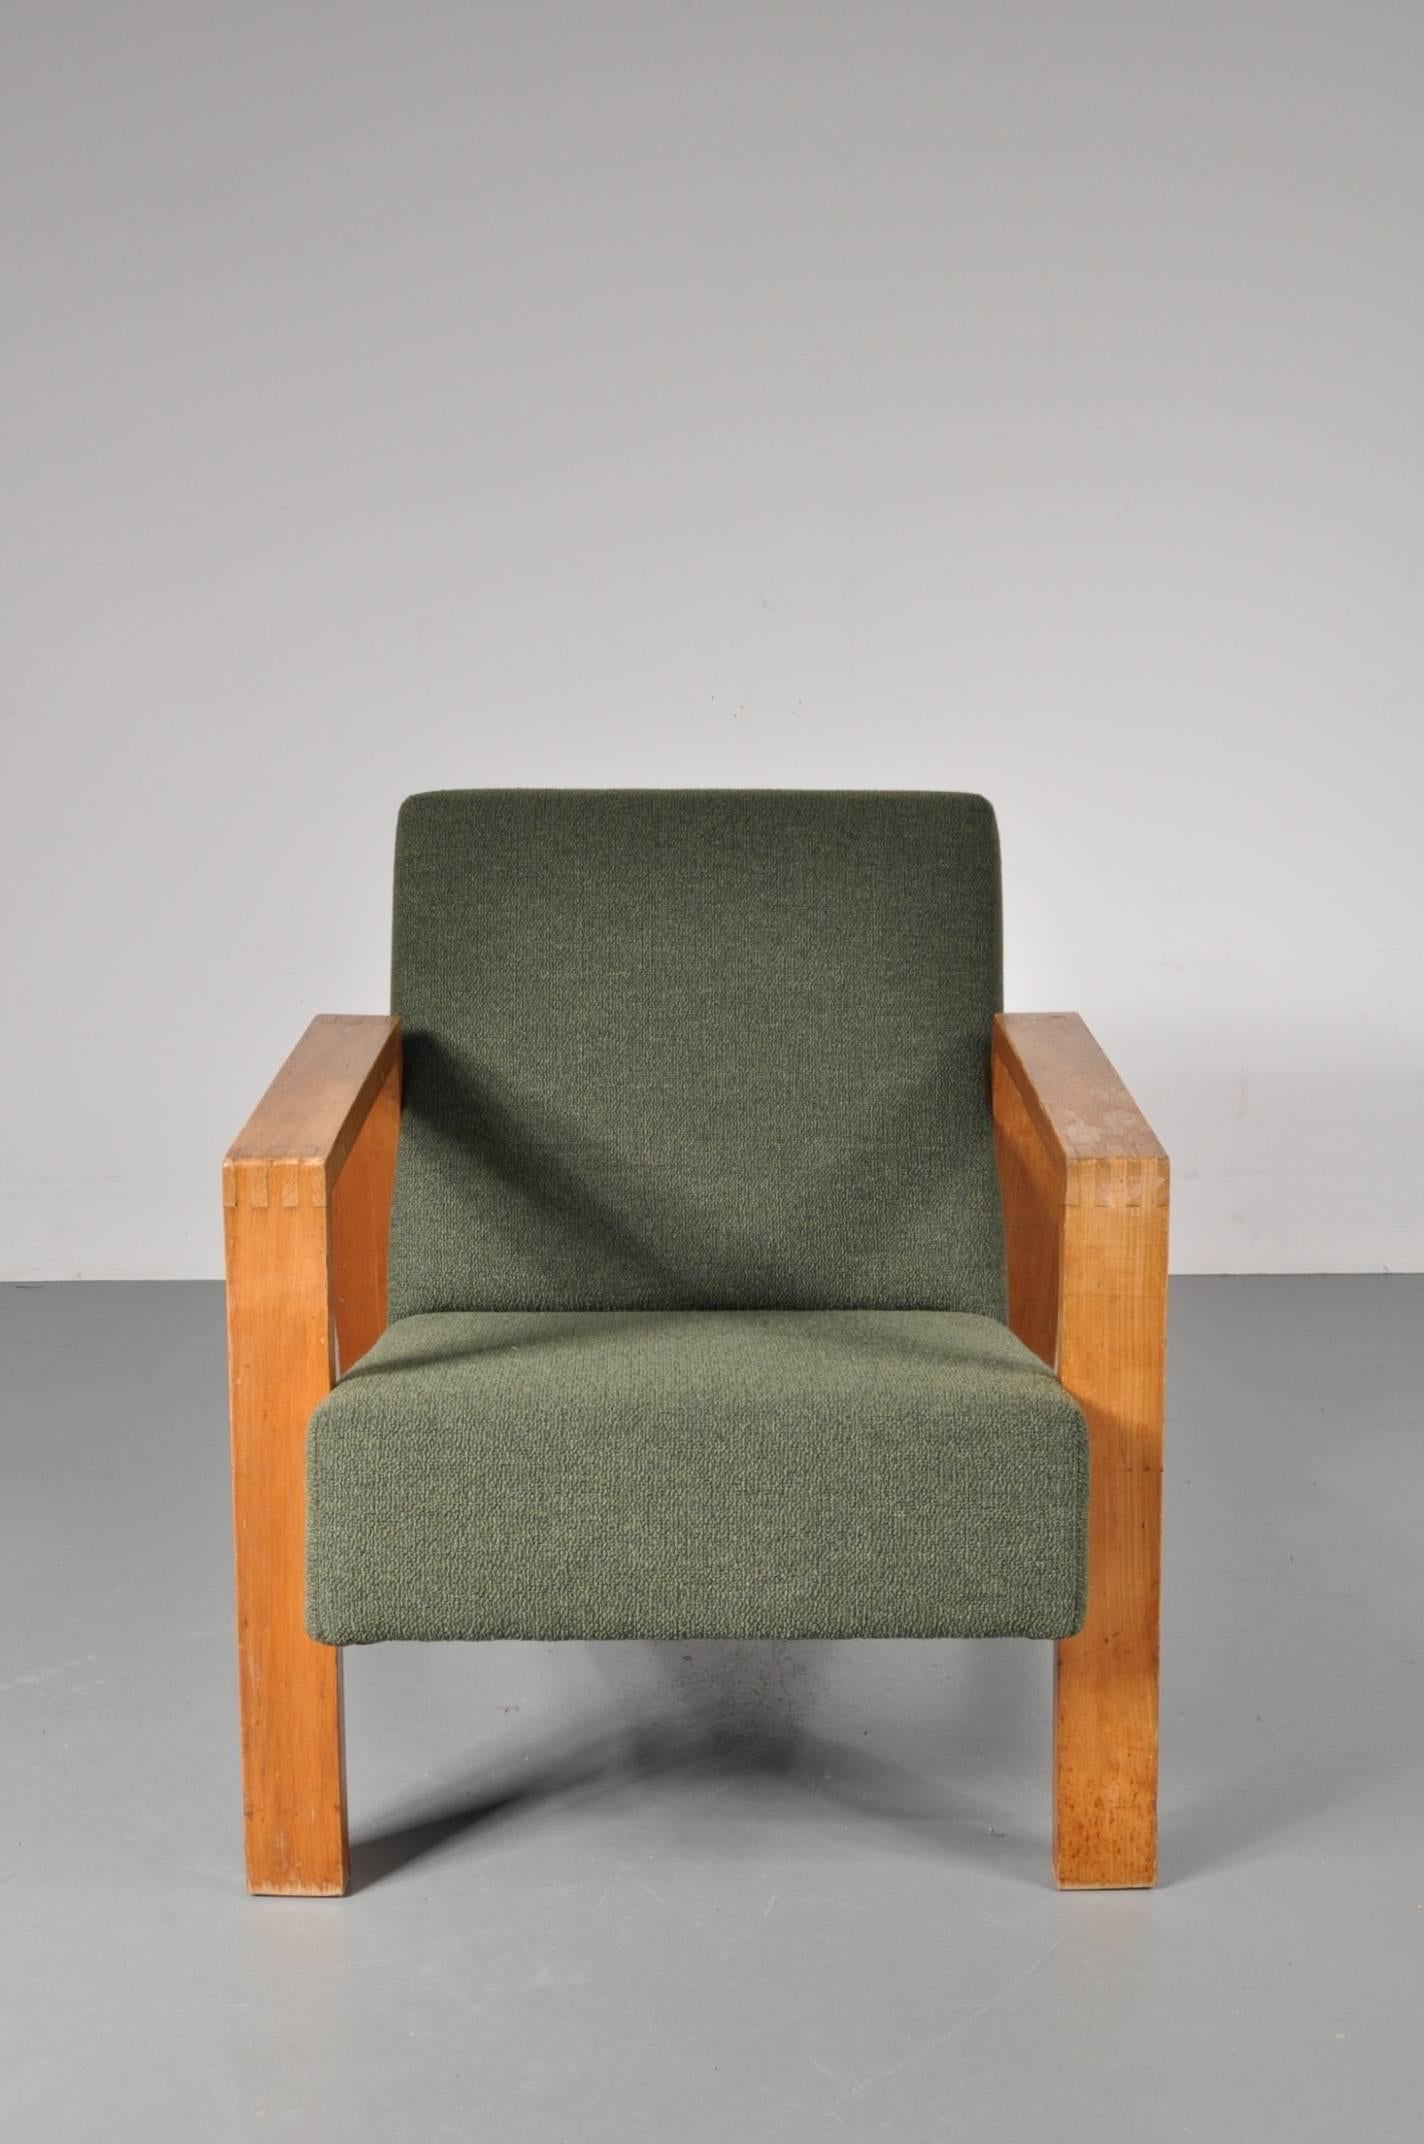 Rare Lounge Chair by Groep & for Goed Wonen, Netherlands 1946 In Excellent Condition For Sale In Amsterdam, NL